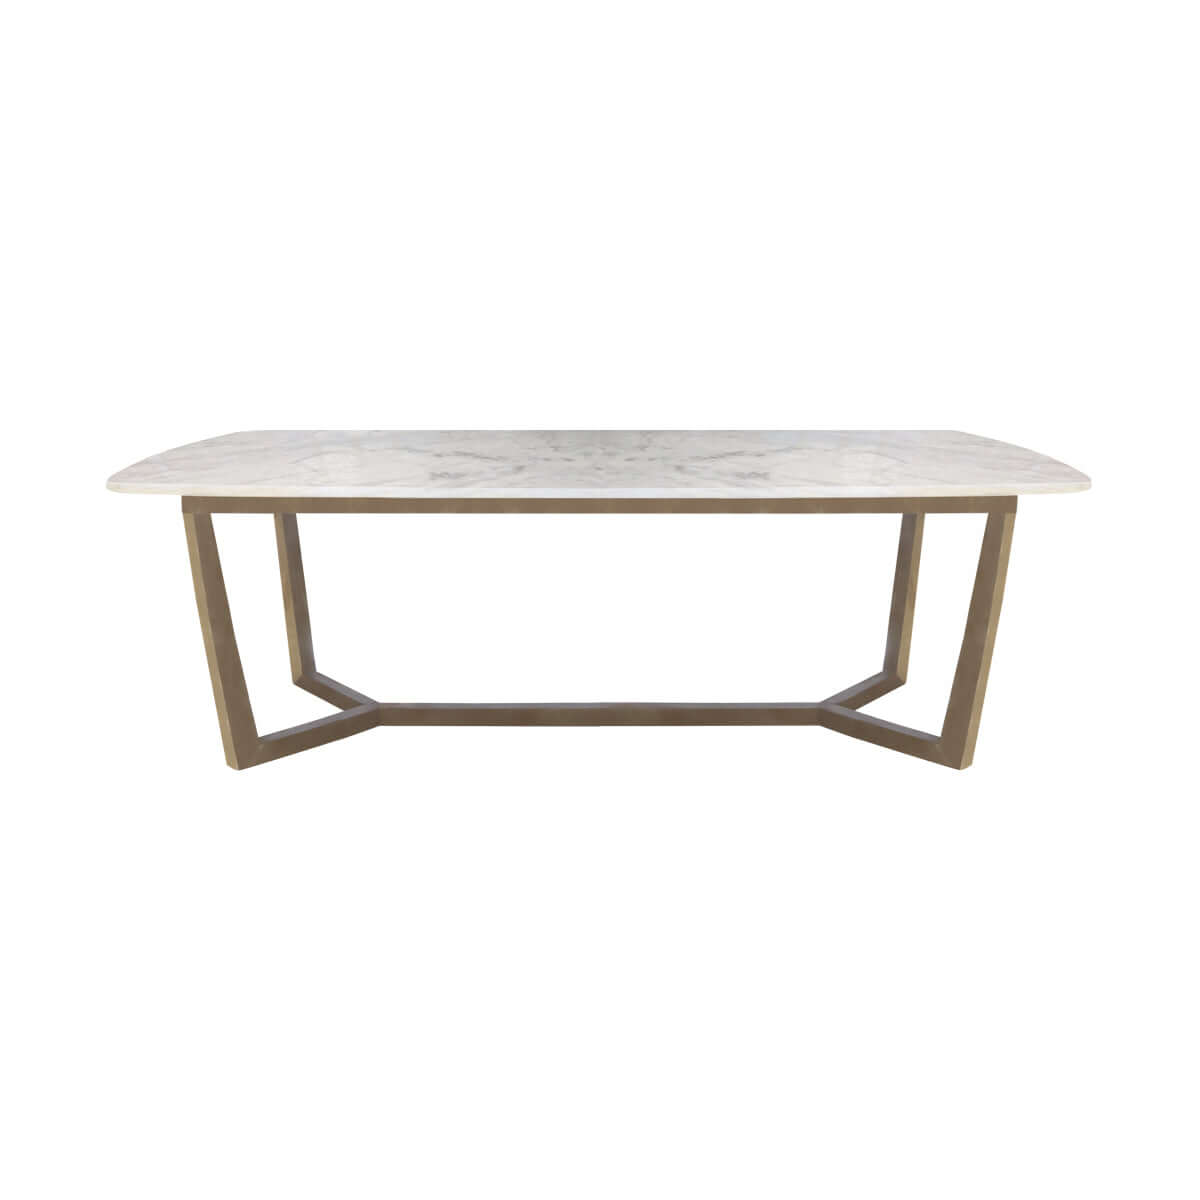 indonesia online furniture - dining table with marble top